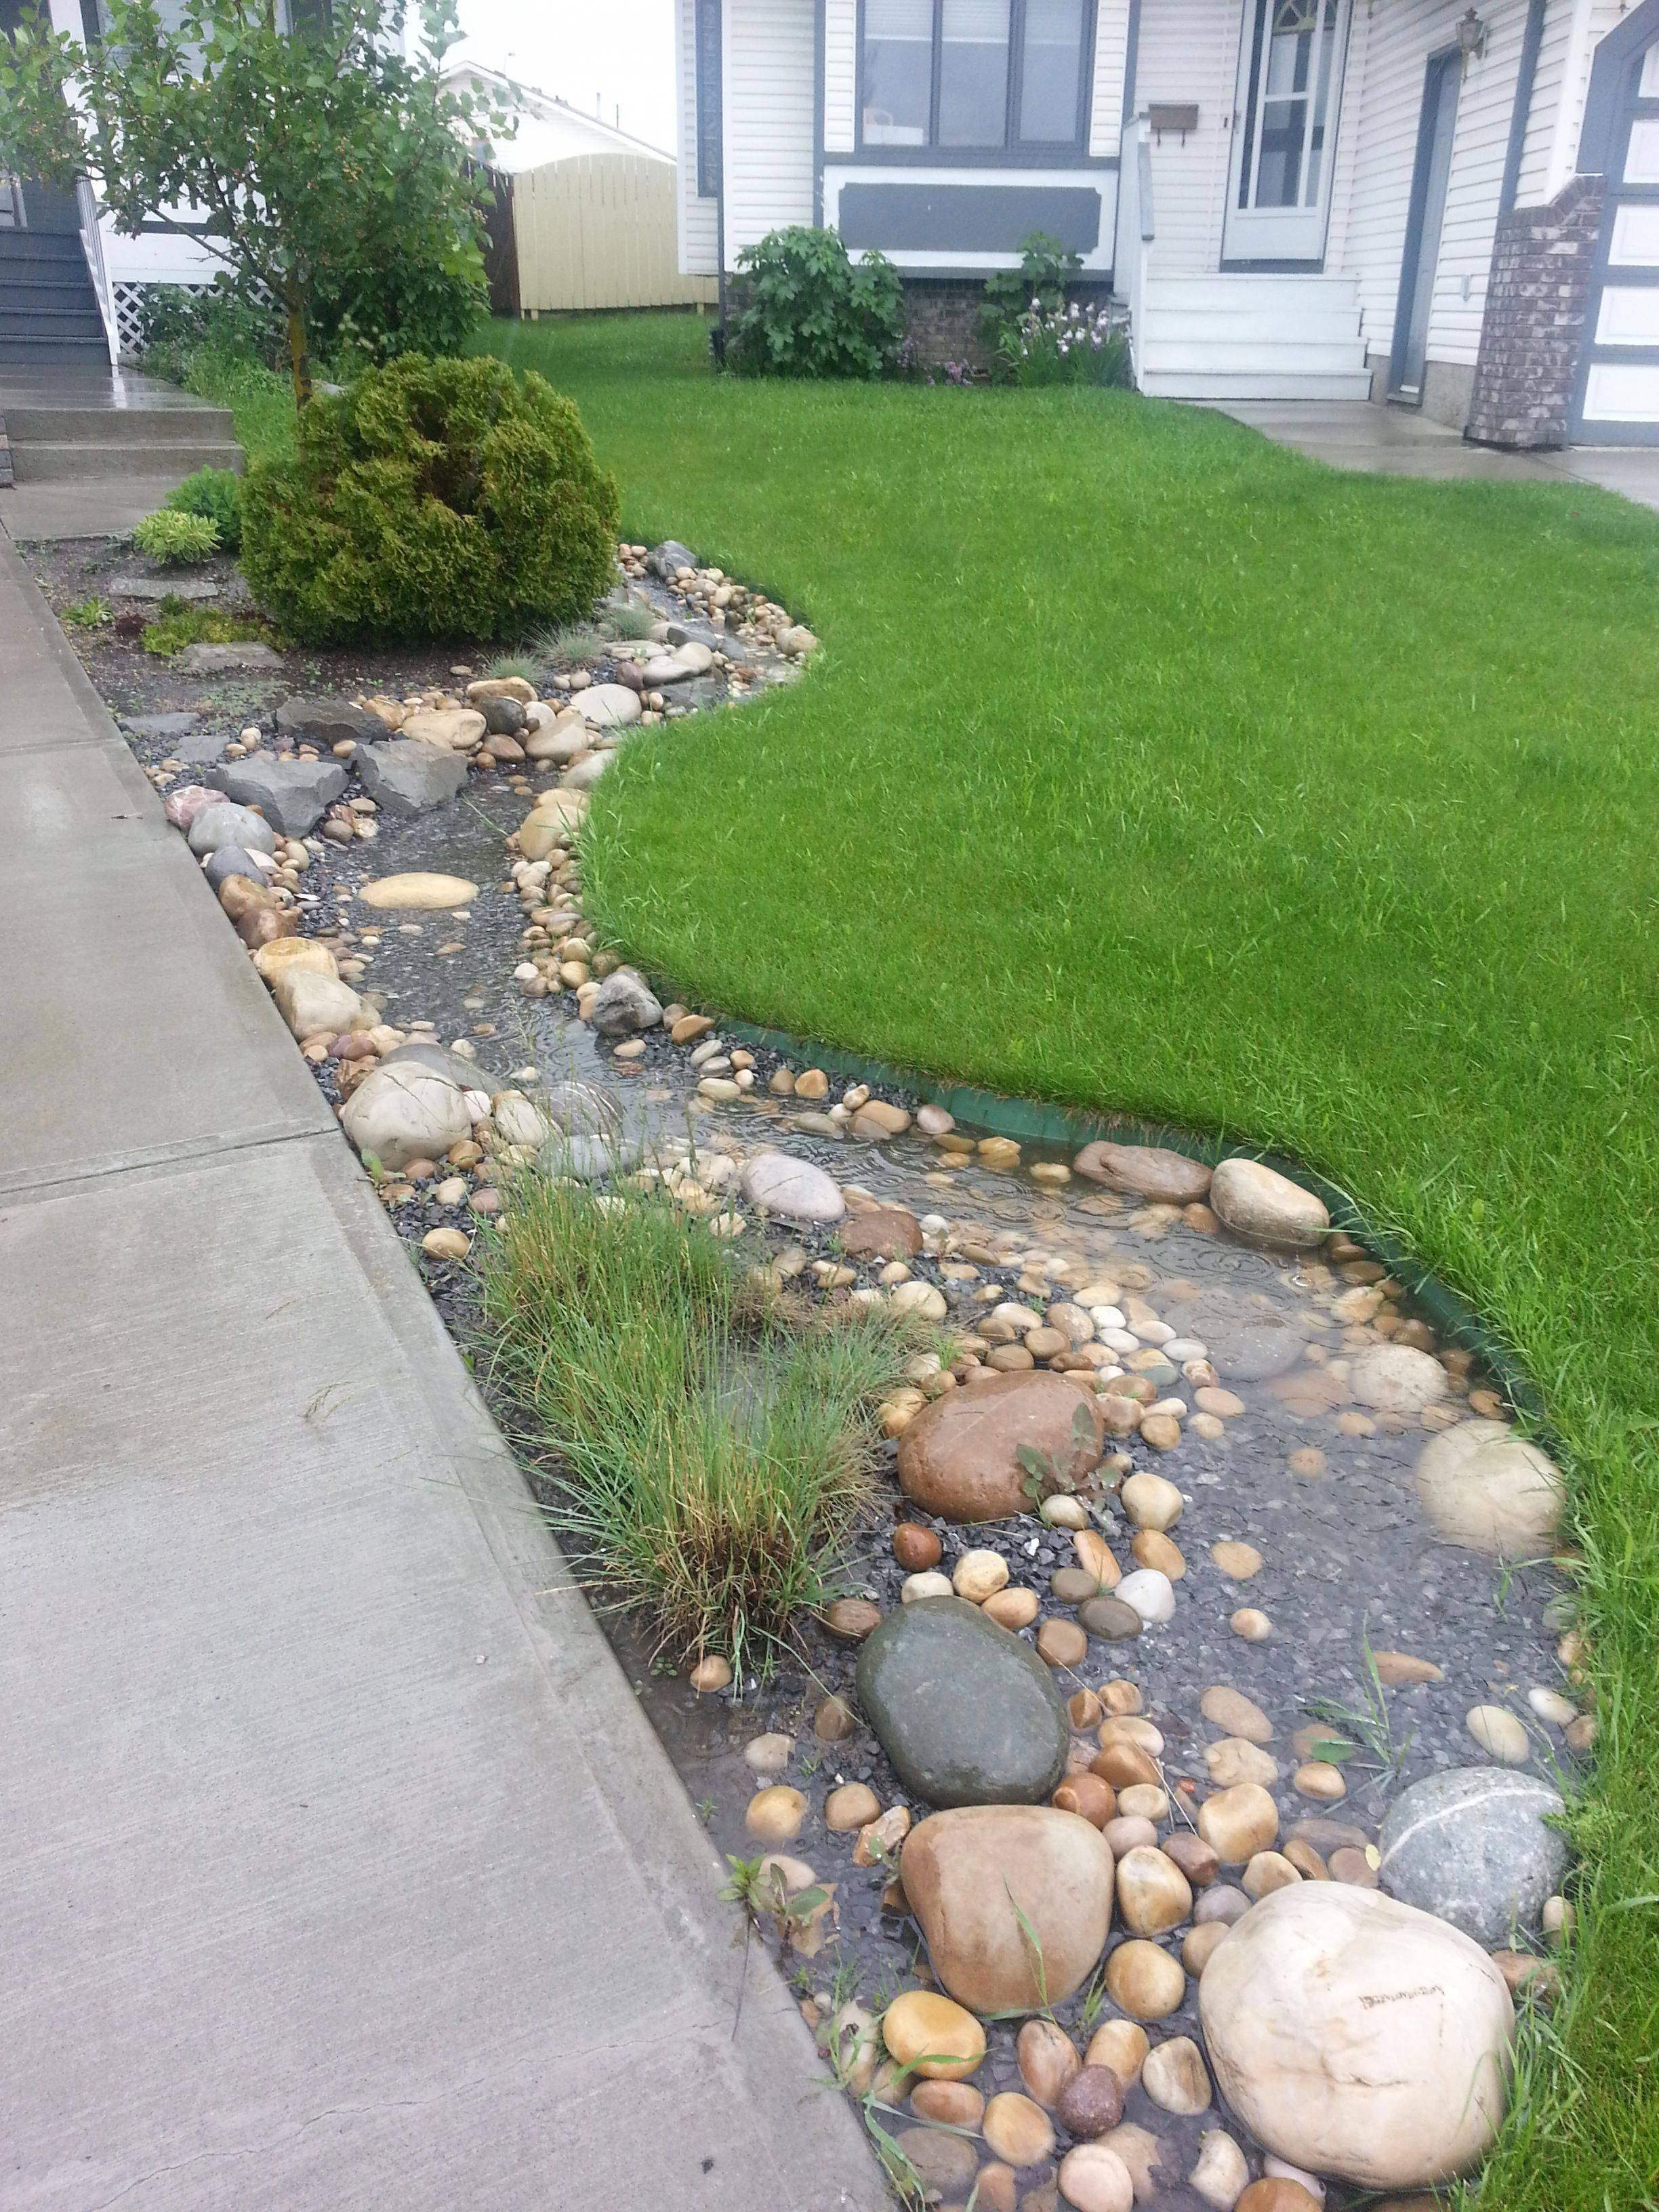 Outstanding Natural Garden Stream Designs That Will Amaze You